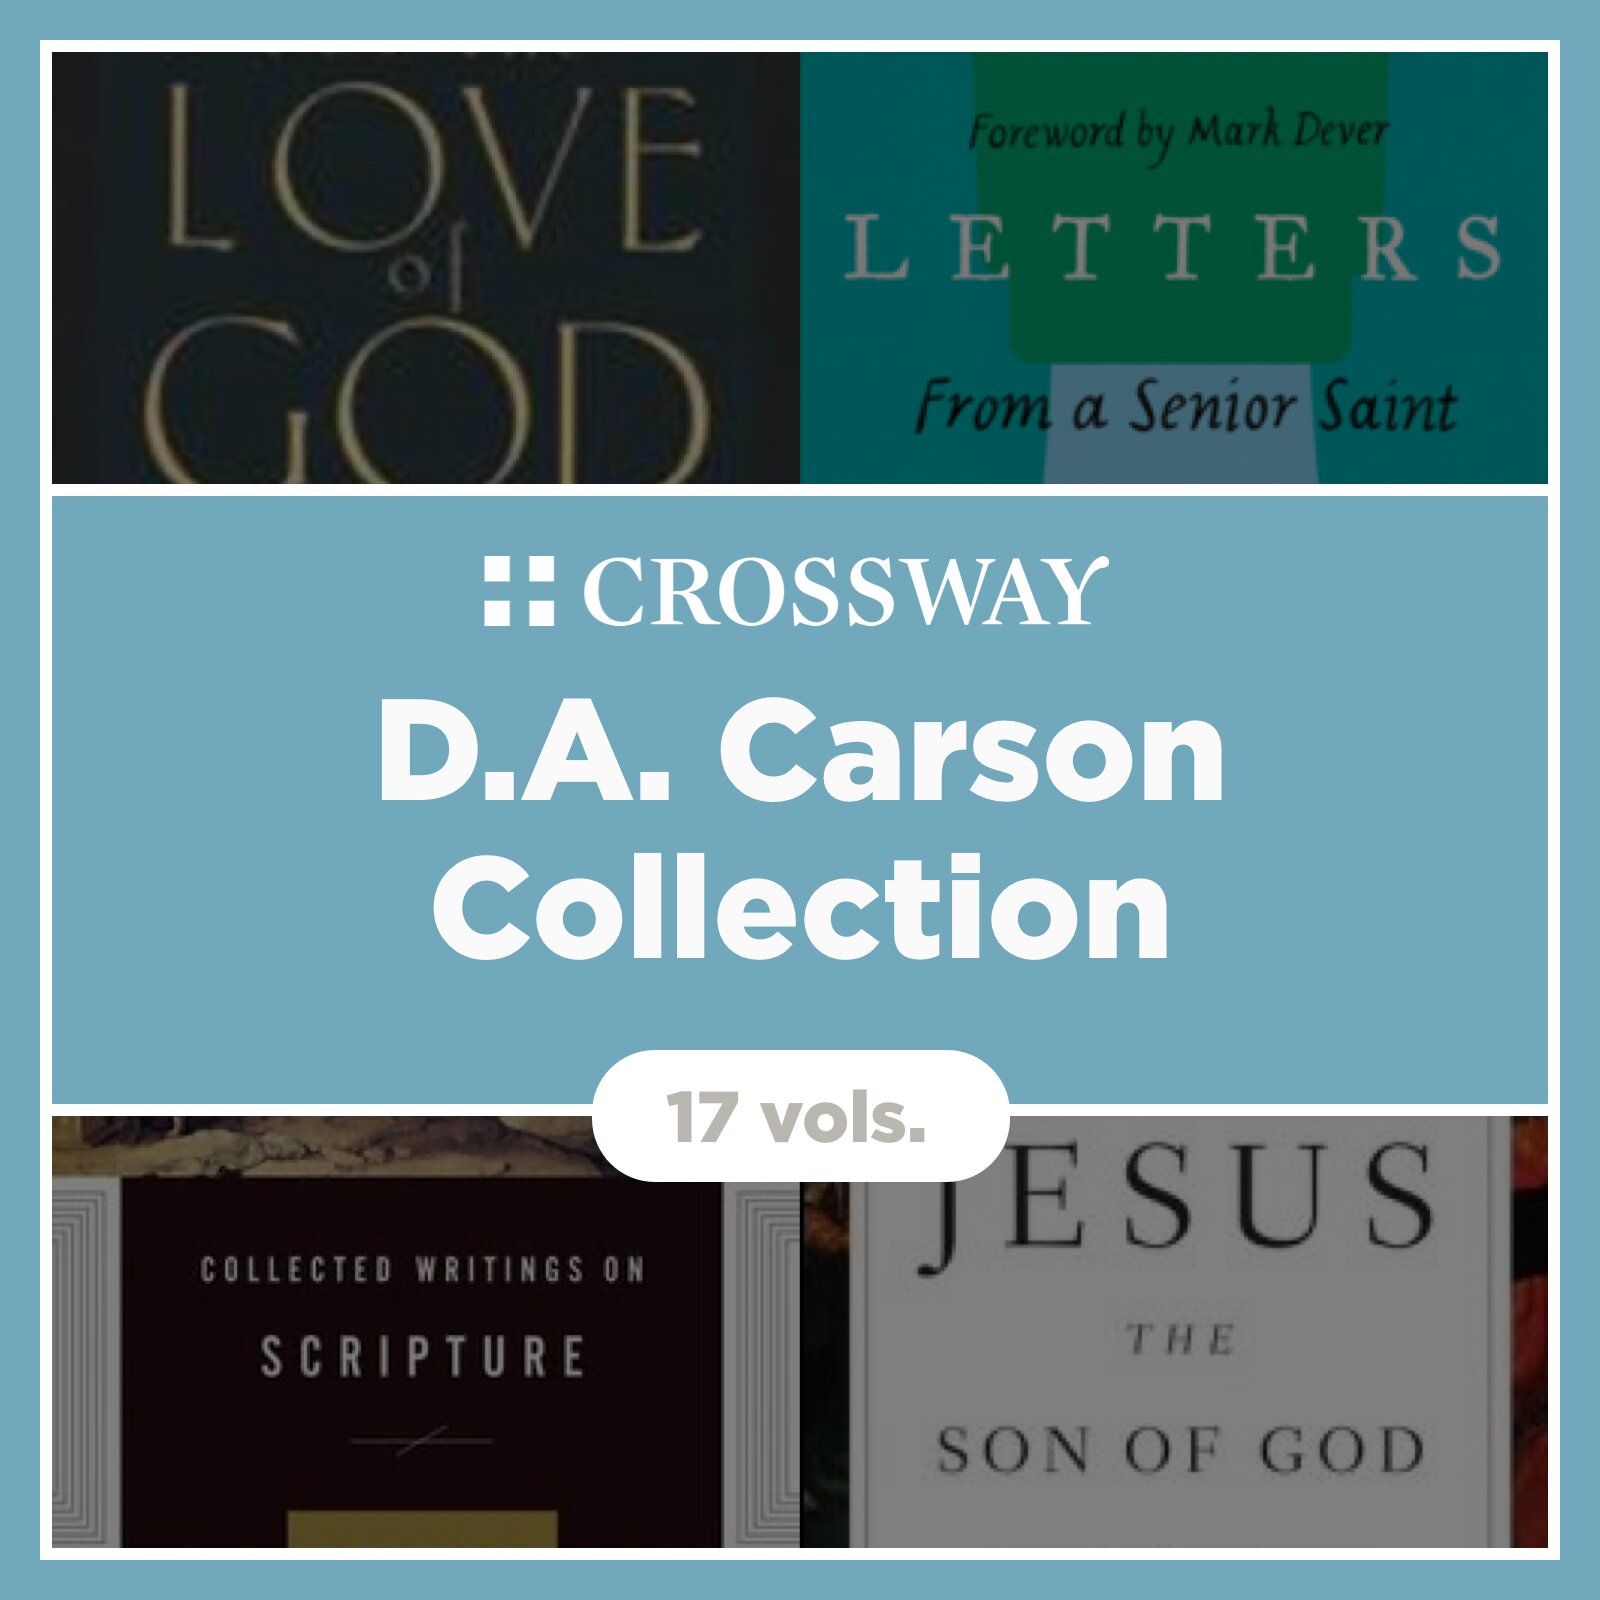 Crossway D. A. Carson Collection (17 vols.)